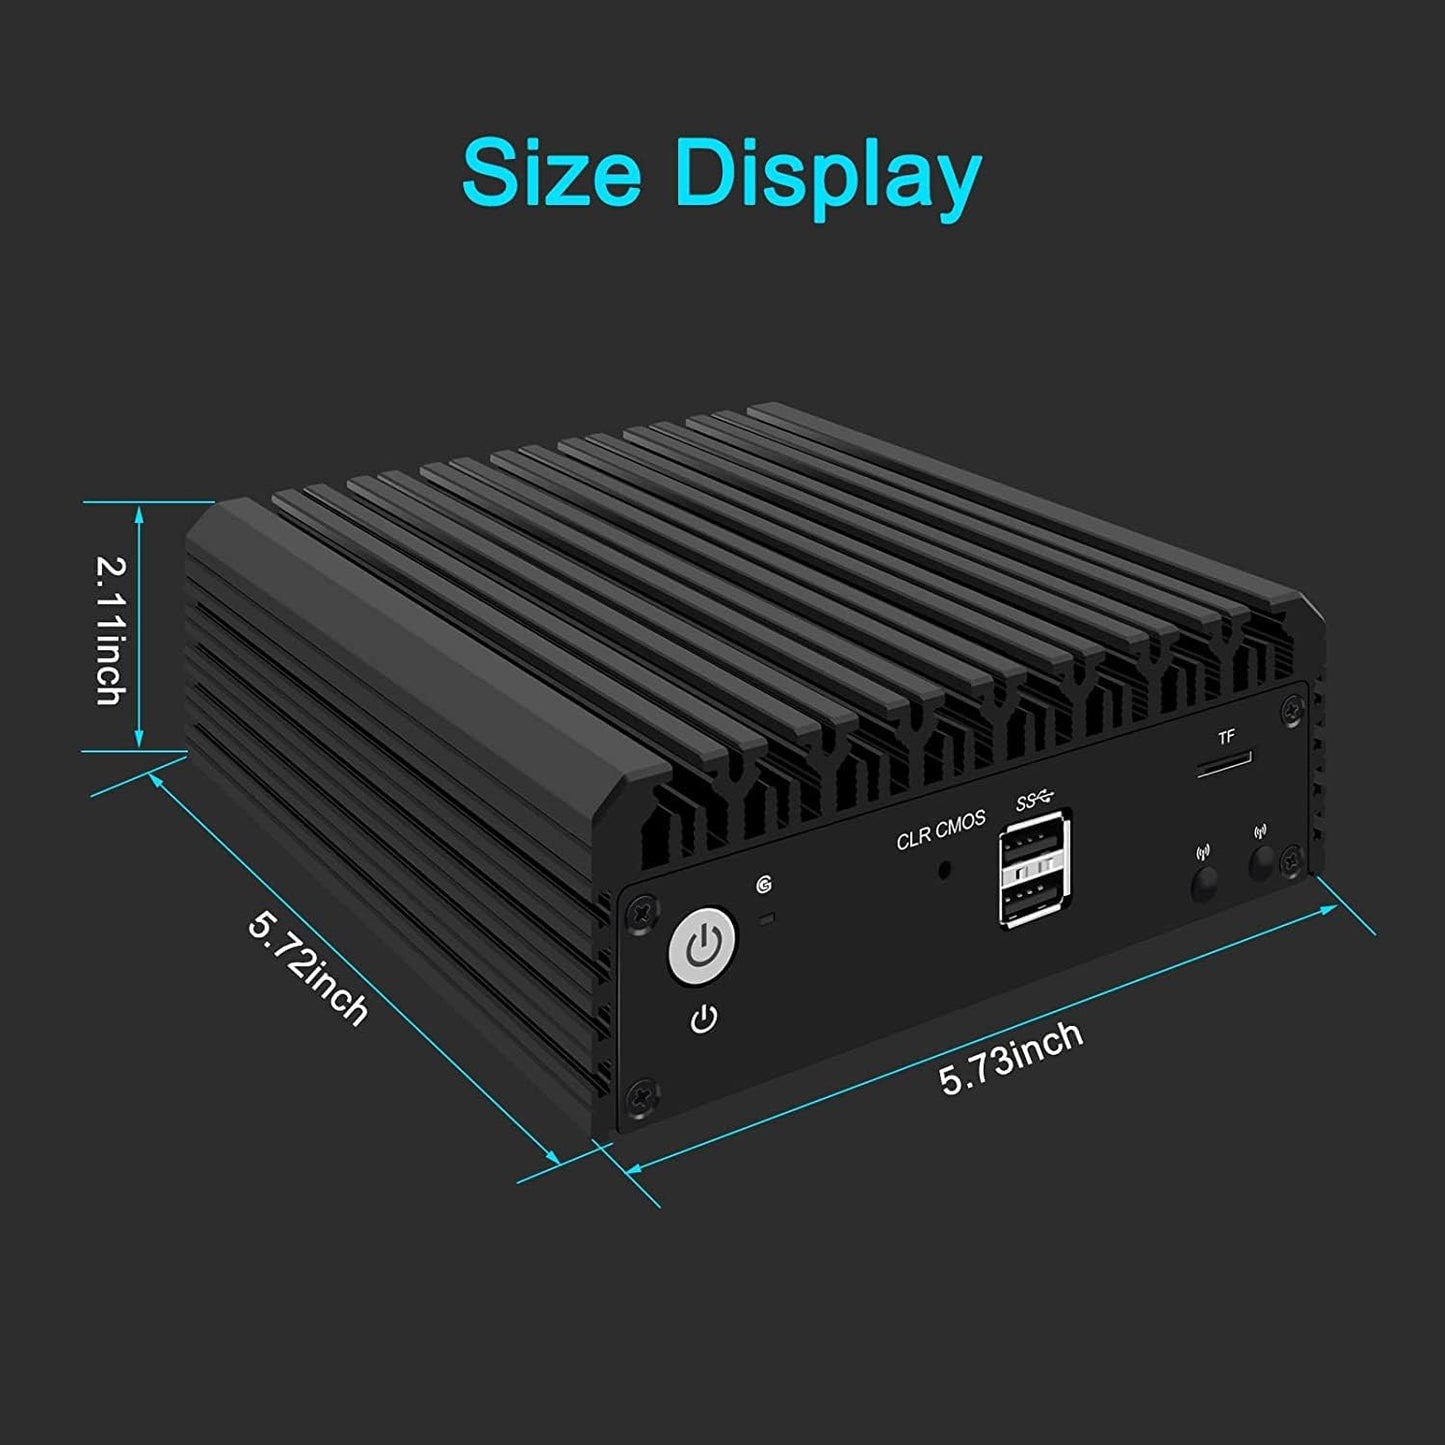 MOGINSOK 2.5GbE Firewall Appliance Mini PC, N100/I3 N305 Fanless Mini Computer Router with 4xIntel I226 Nics  DDR5 RAM PCIE 3.0 SSD Support AES-NI